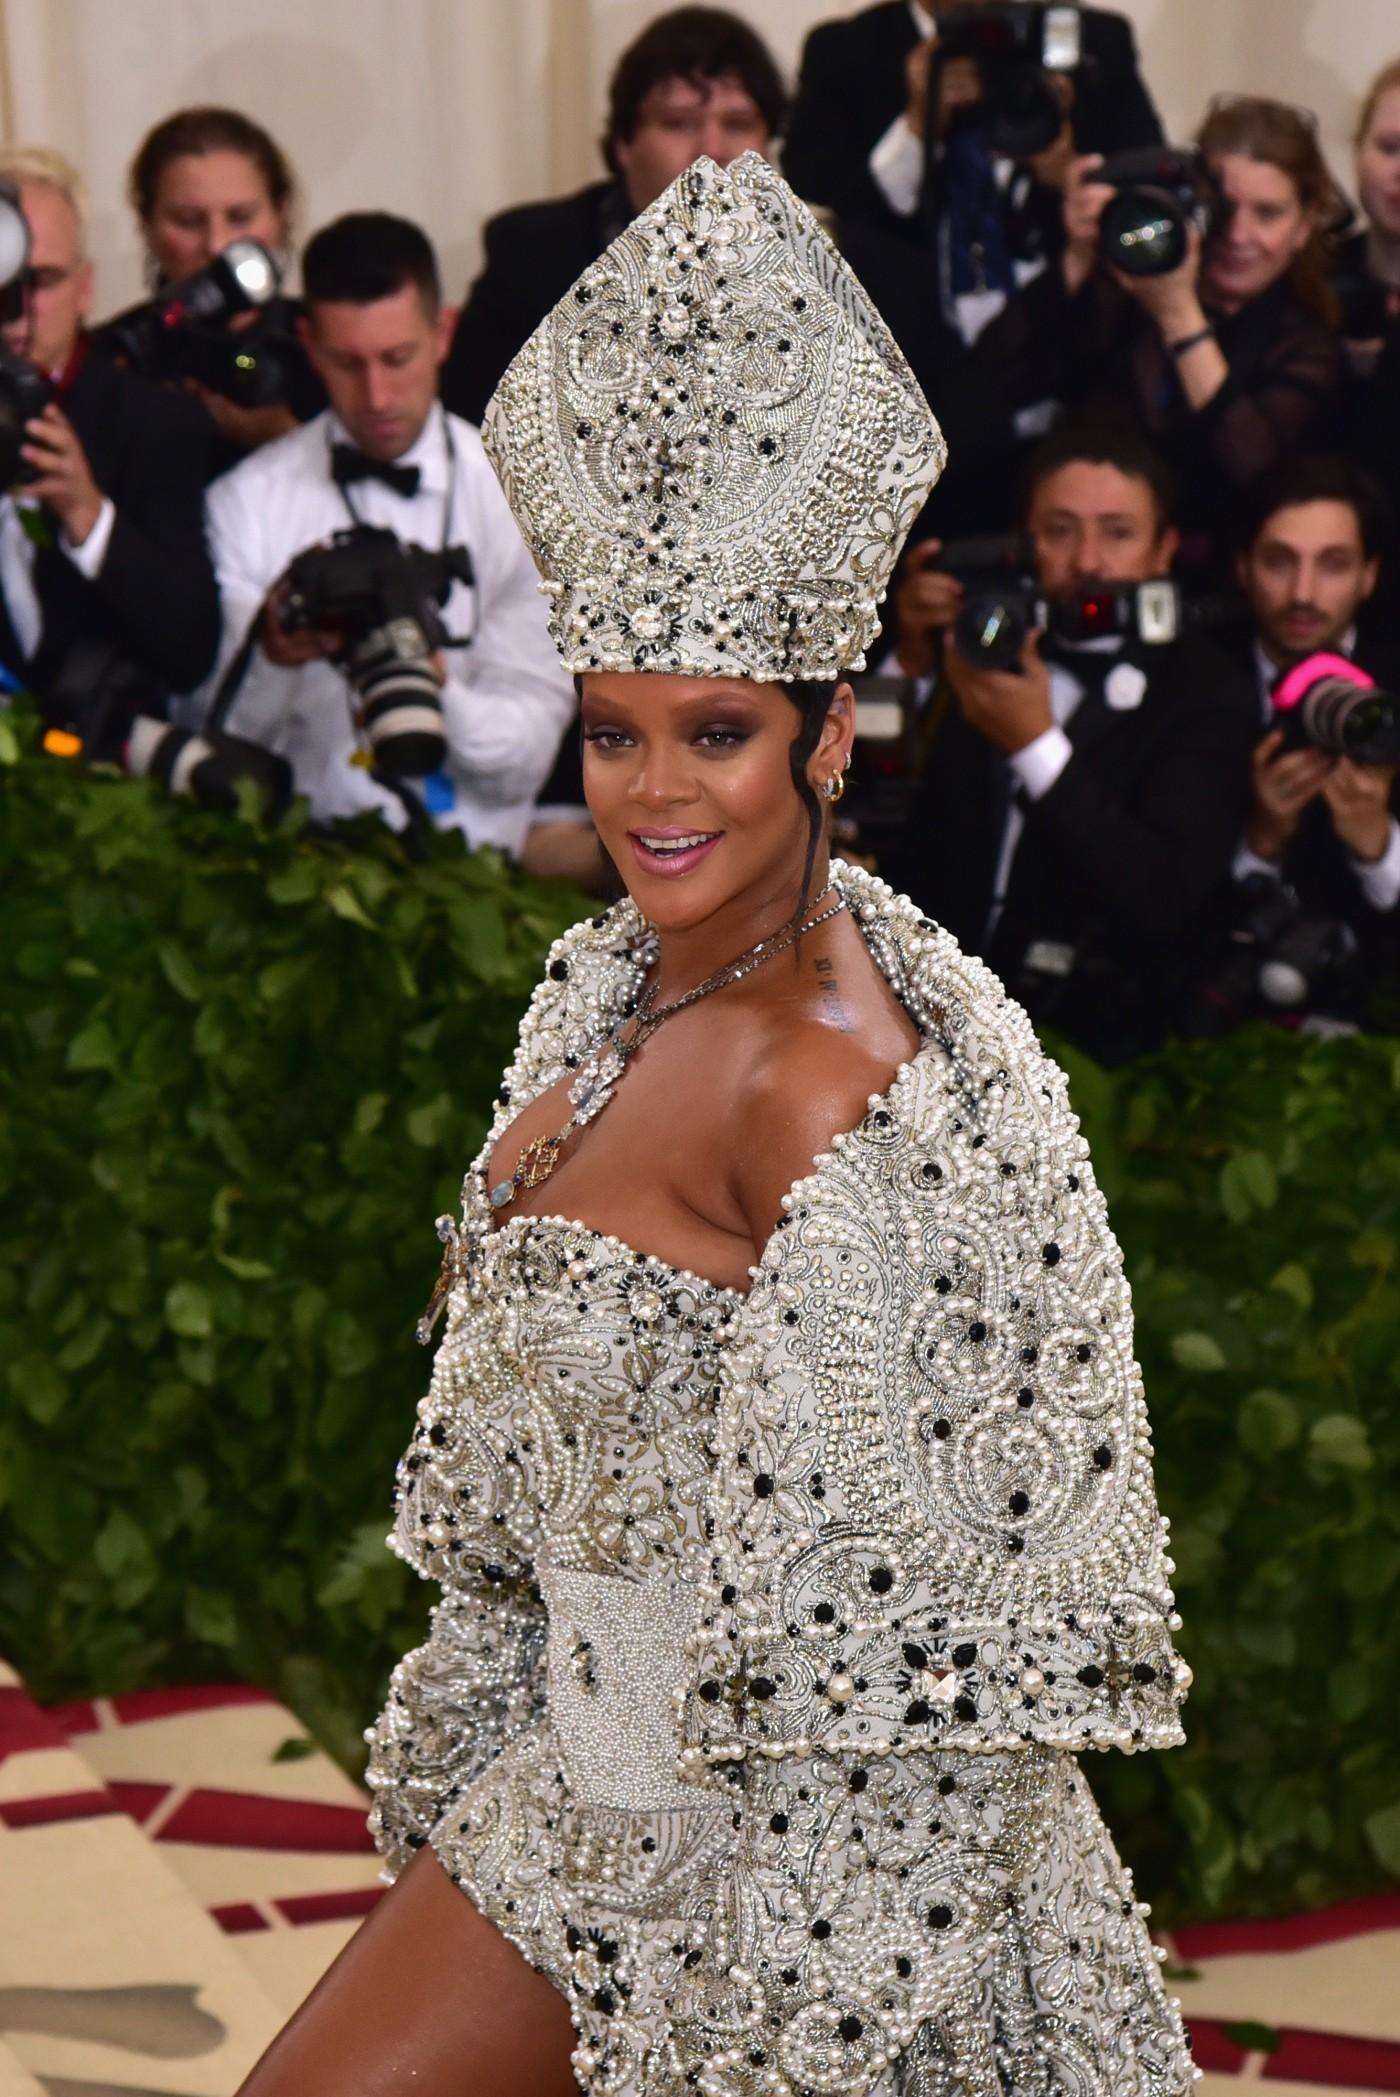 This Catholic Cardinal Loaned Rihanna His Hat for the Met Gala